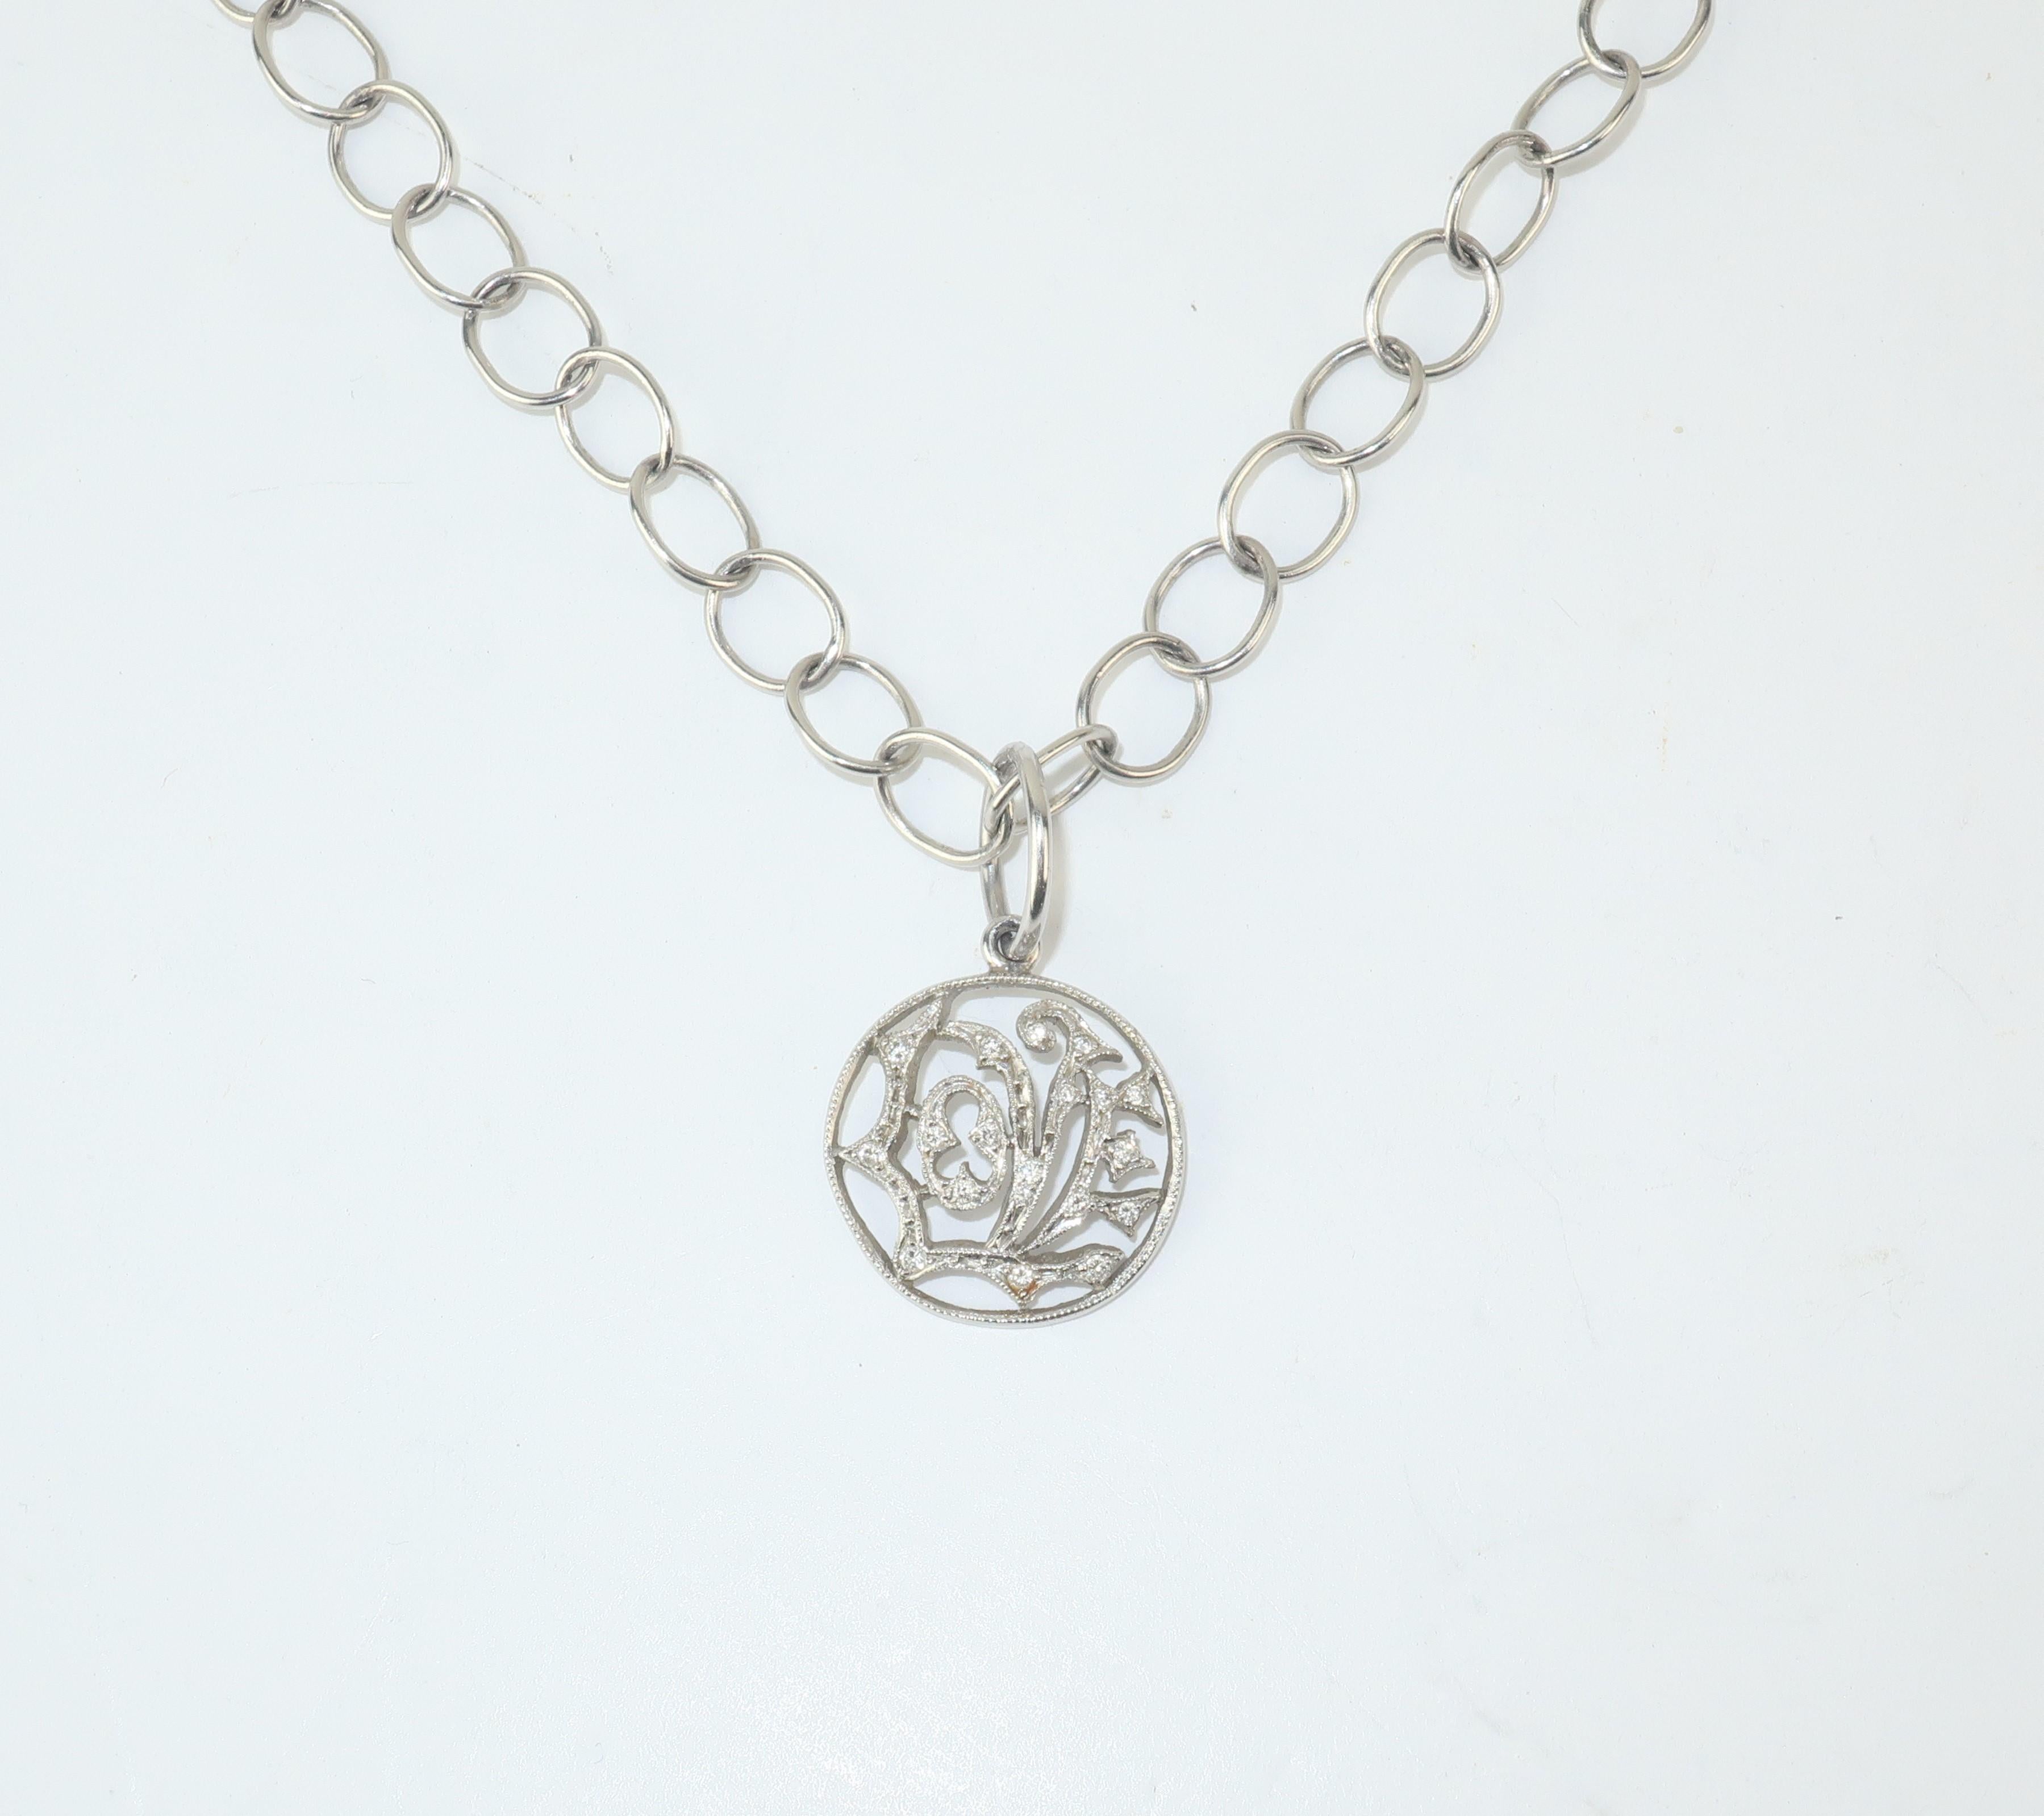 Beautiful Cathy Waterman 'Love' necklace combining a delicate aesthetic with an intricate platinum design accented by diamonds.  The toggle closure provides for easy wear and offers an artisan element to fine link necklace suspending the pendant. 